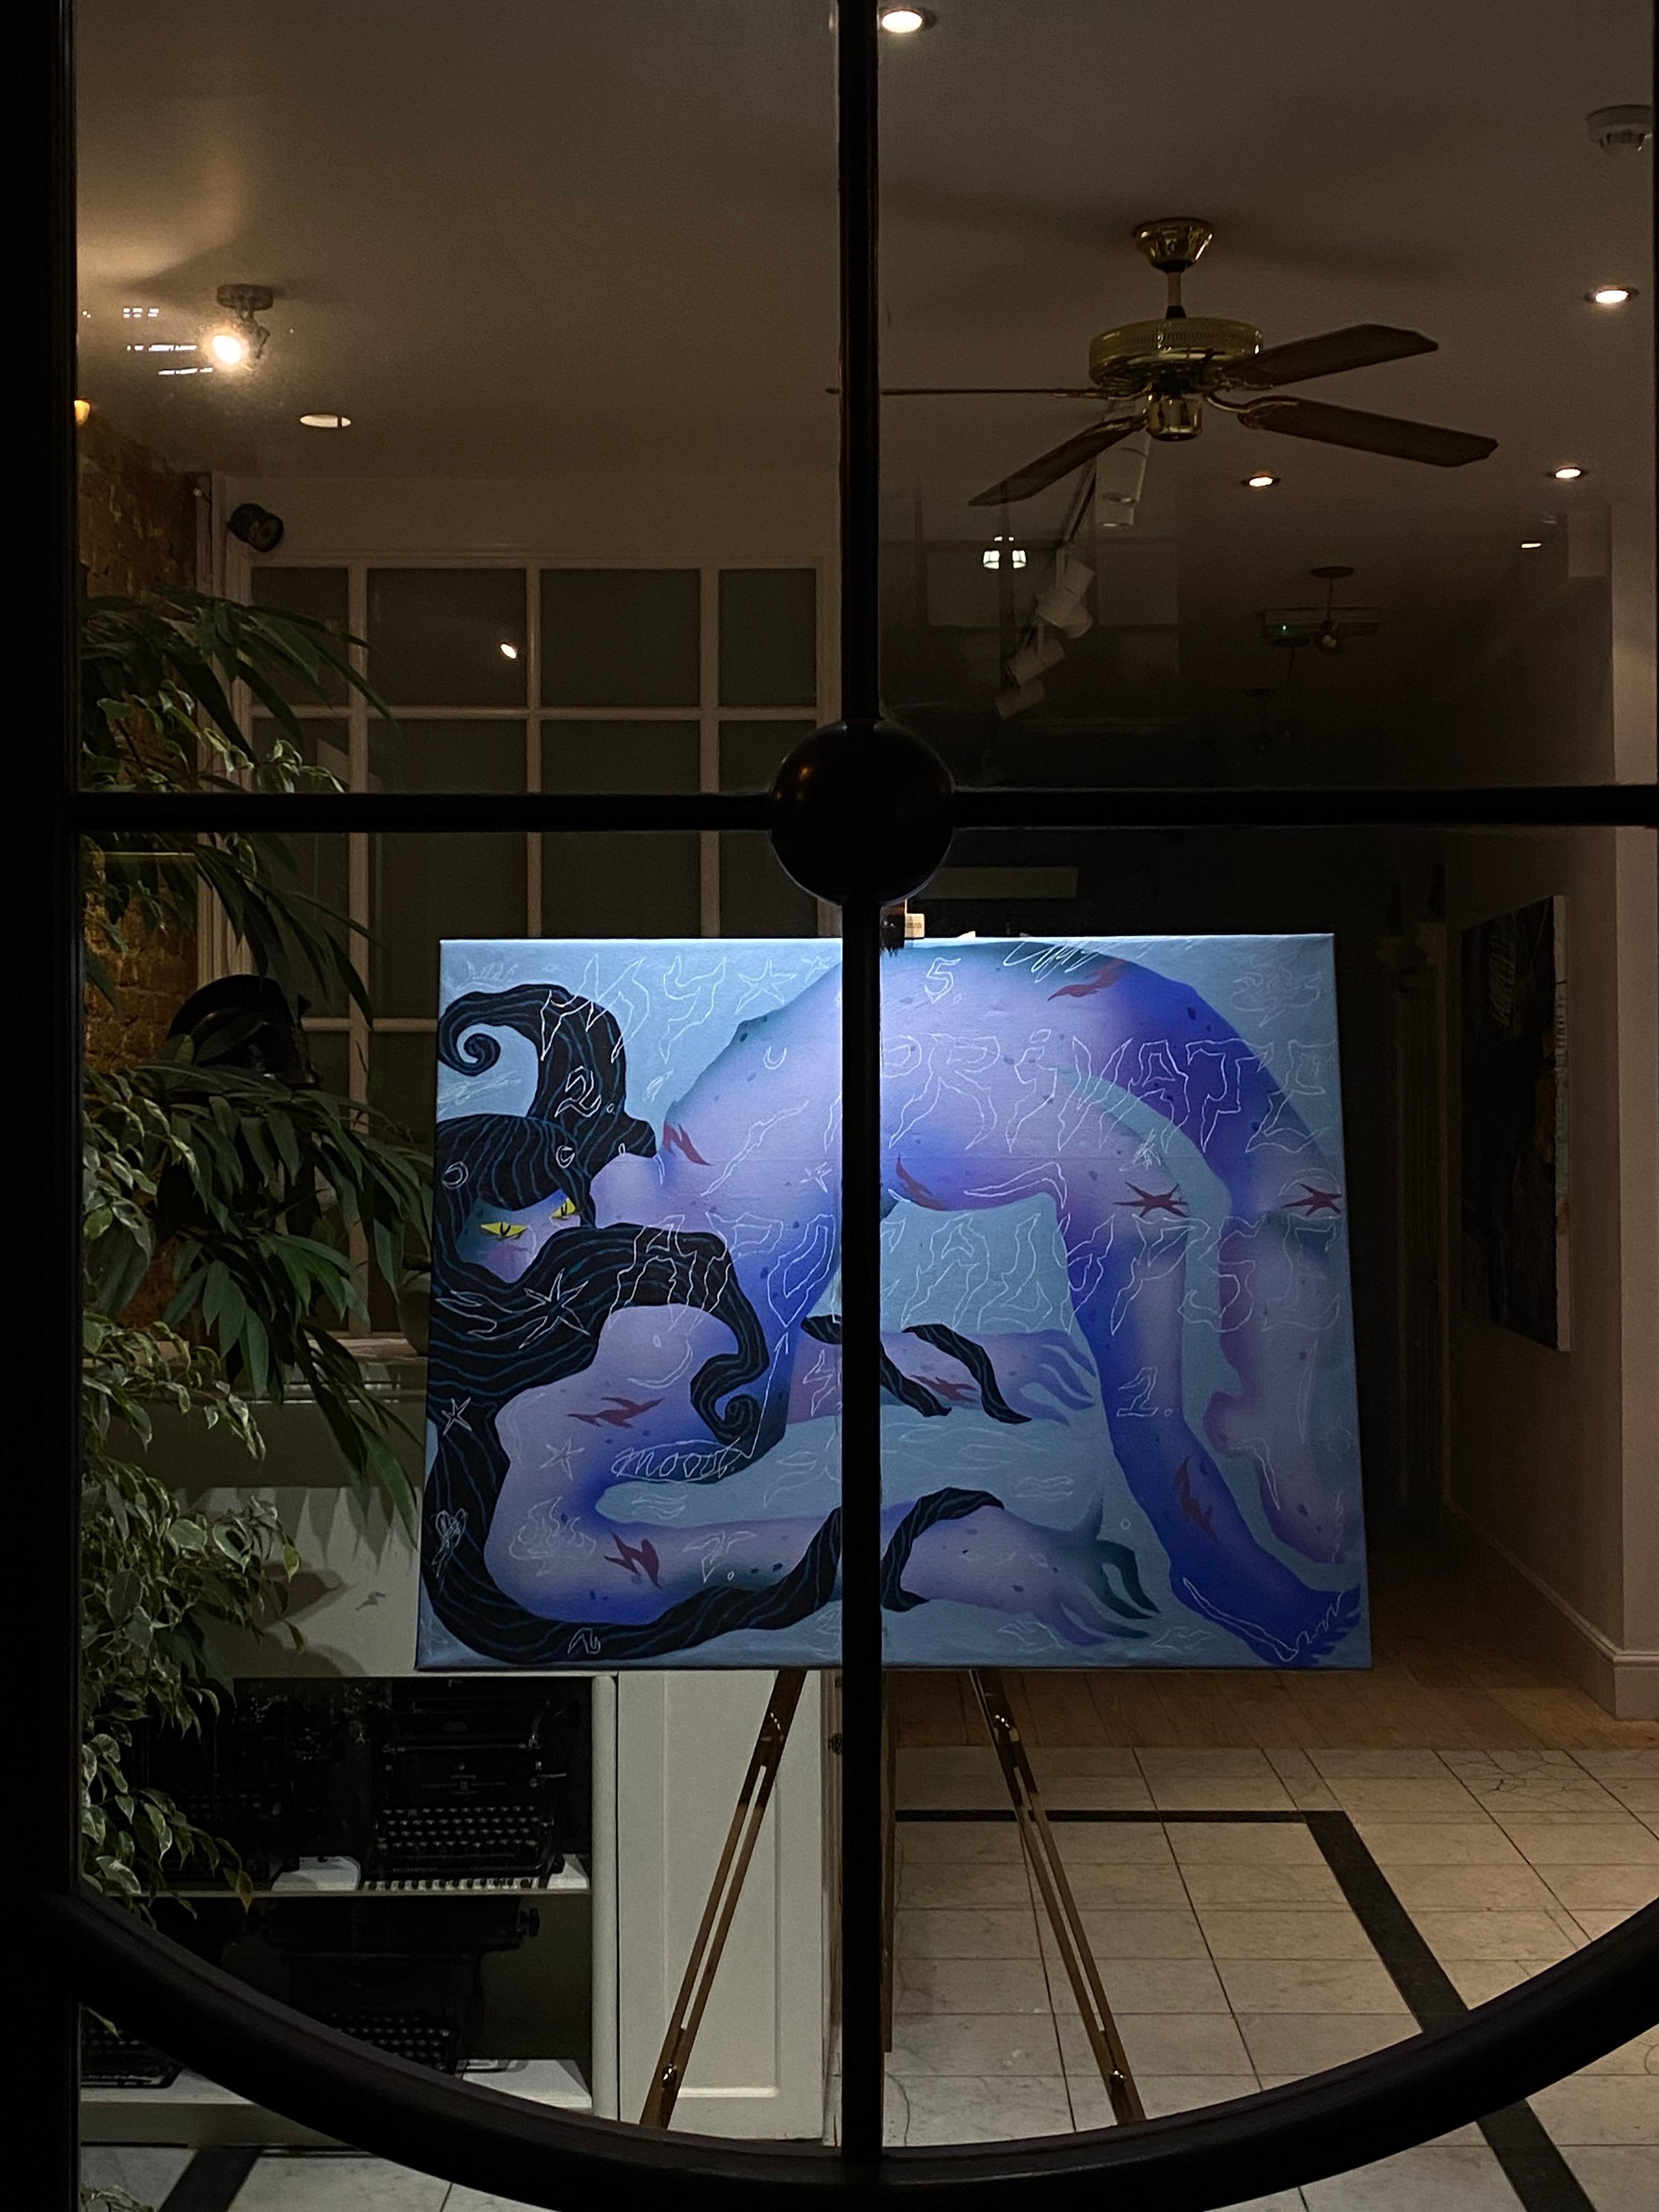 Apo, 2021

Valerie Savchits’ paintings confront a particular reality where humanity failed to fight its own apathy. Fiction became reality. A consistent colour scheme connects her artworks; cold hues of blue and purple and occasionally green.